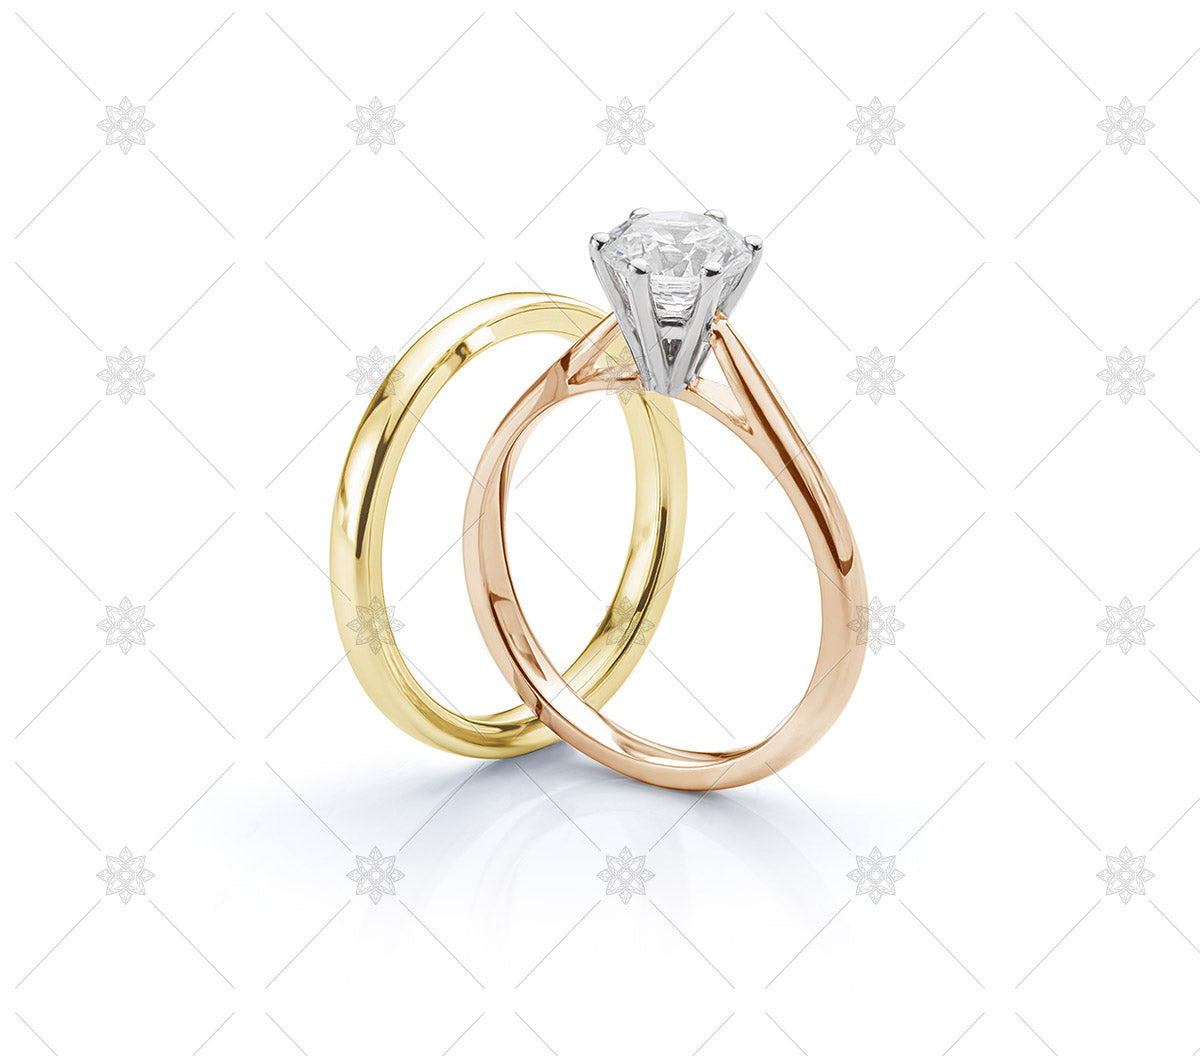 Yellow Gold Wedding Ring and Rose Gold Engagement Ring set